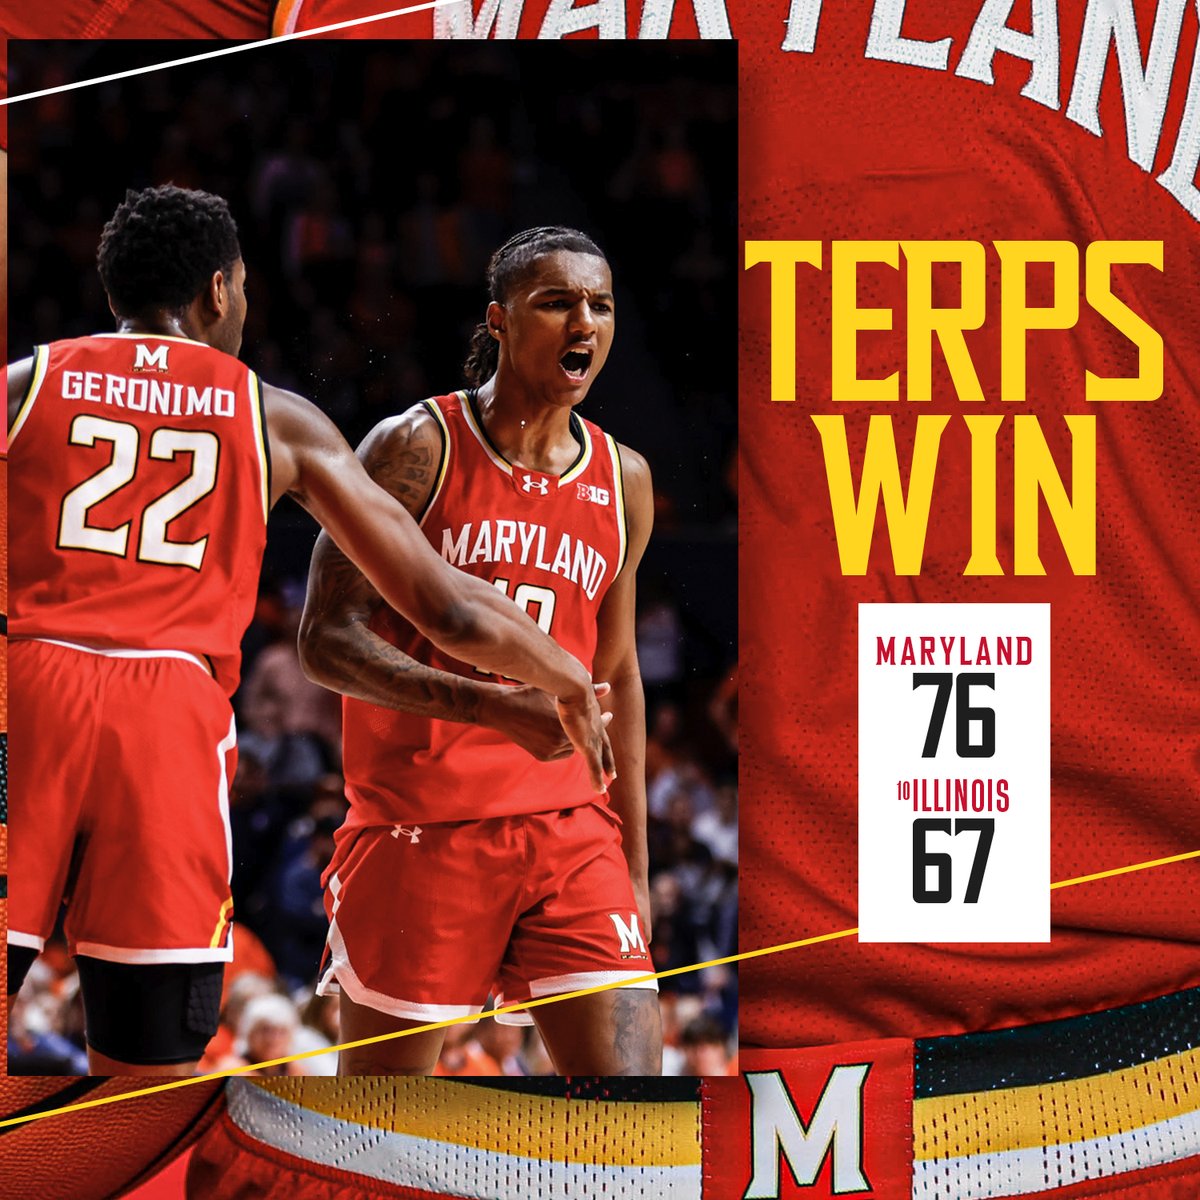 WE LOVE THE TERPS!!!!